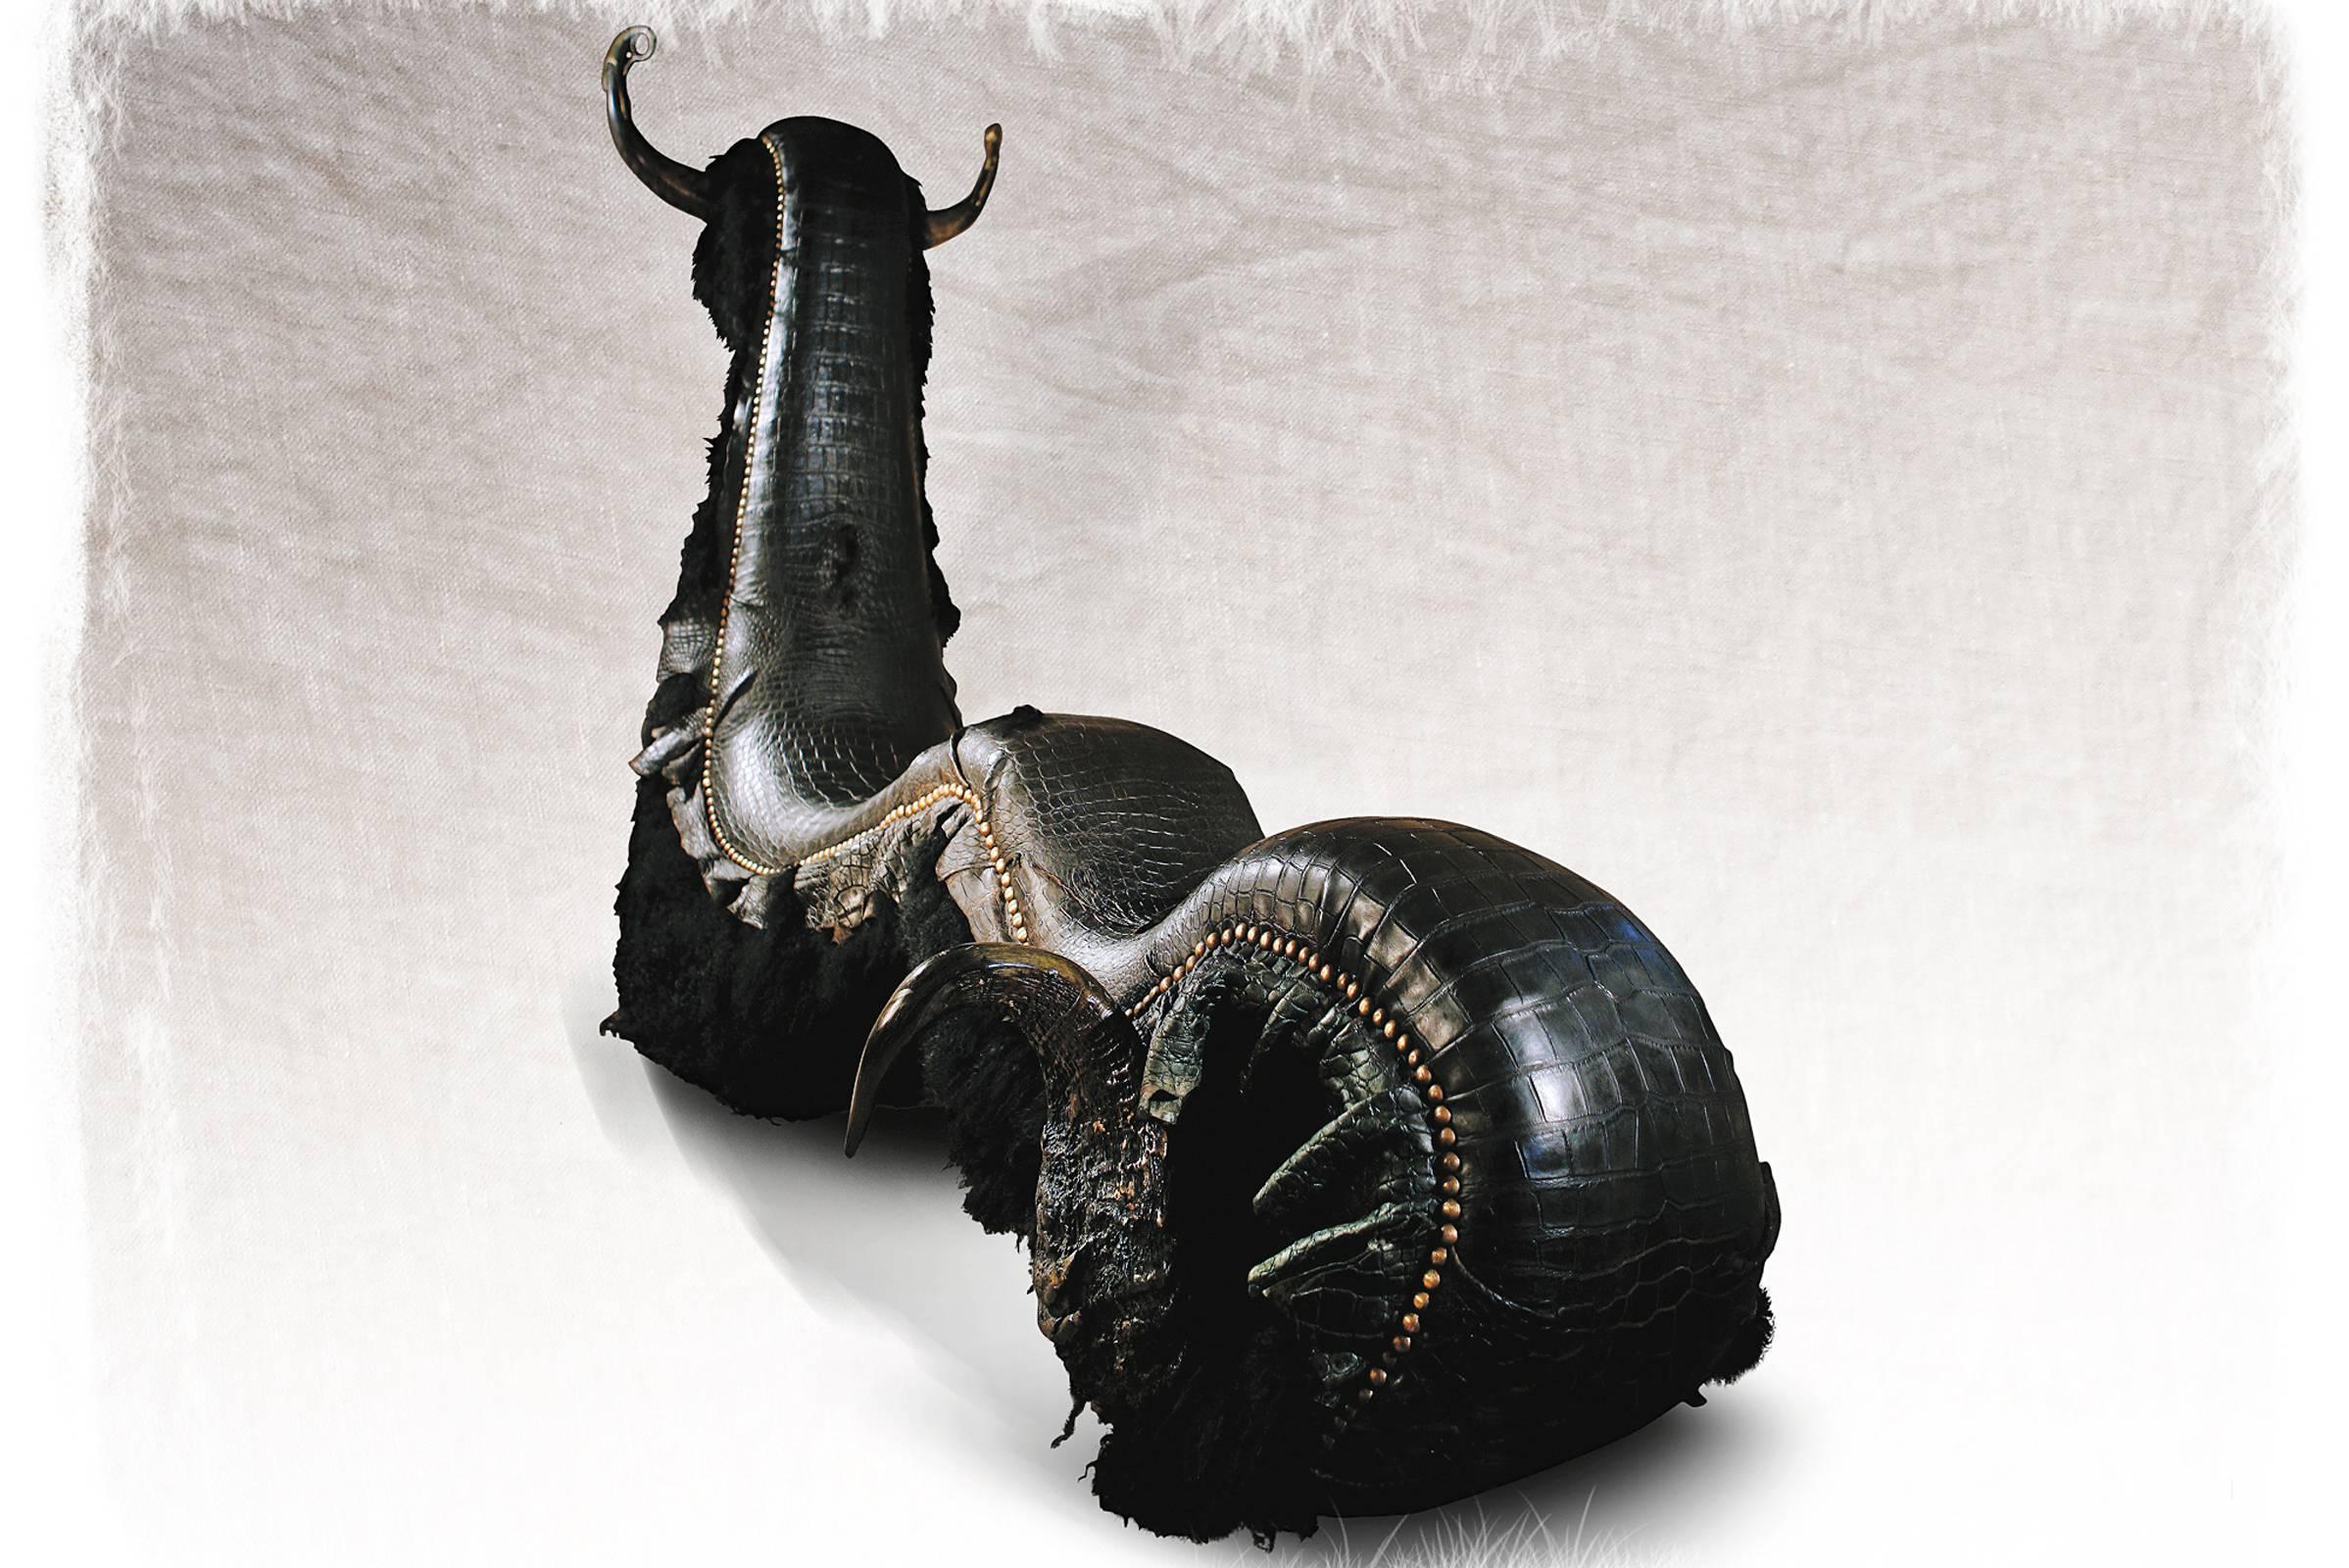 Chair buffalo and black croco with real blackened
grand alligator skin, blackened lamb wool of Mongolia,
Asian and african buffalo horns. Nails and details in
solid bronze. Hand-crafted solid wood structure.
Exceptional piece, made in